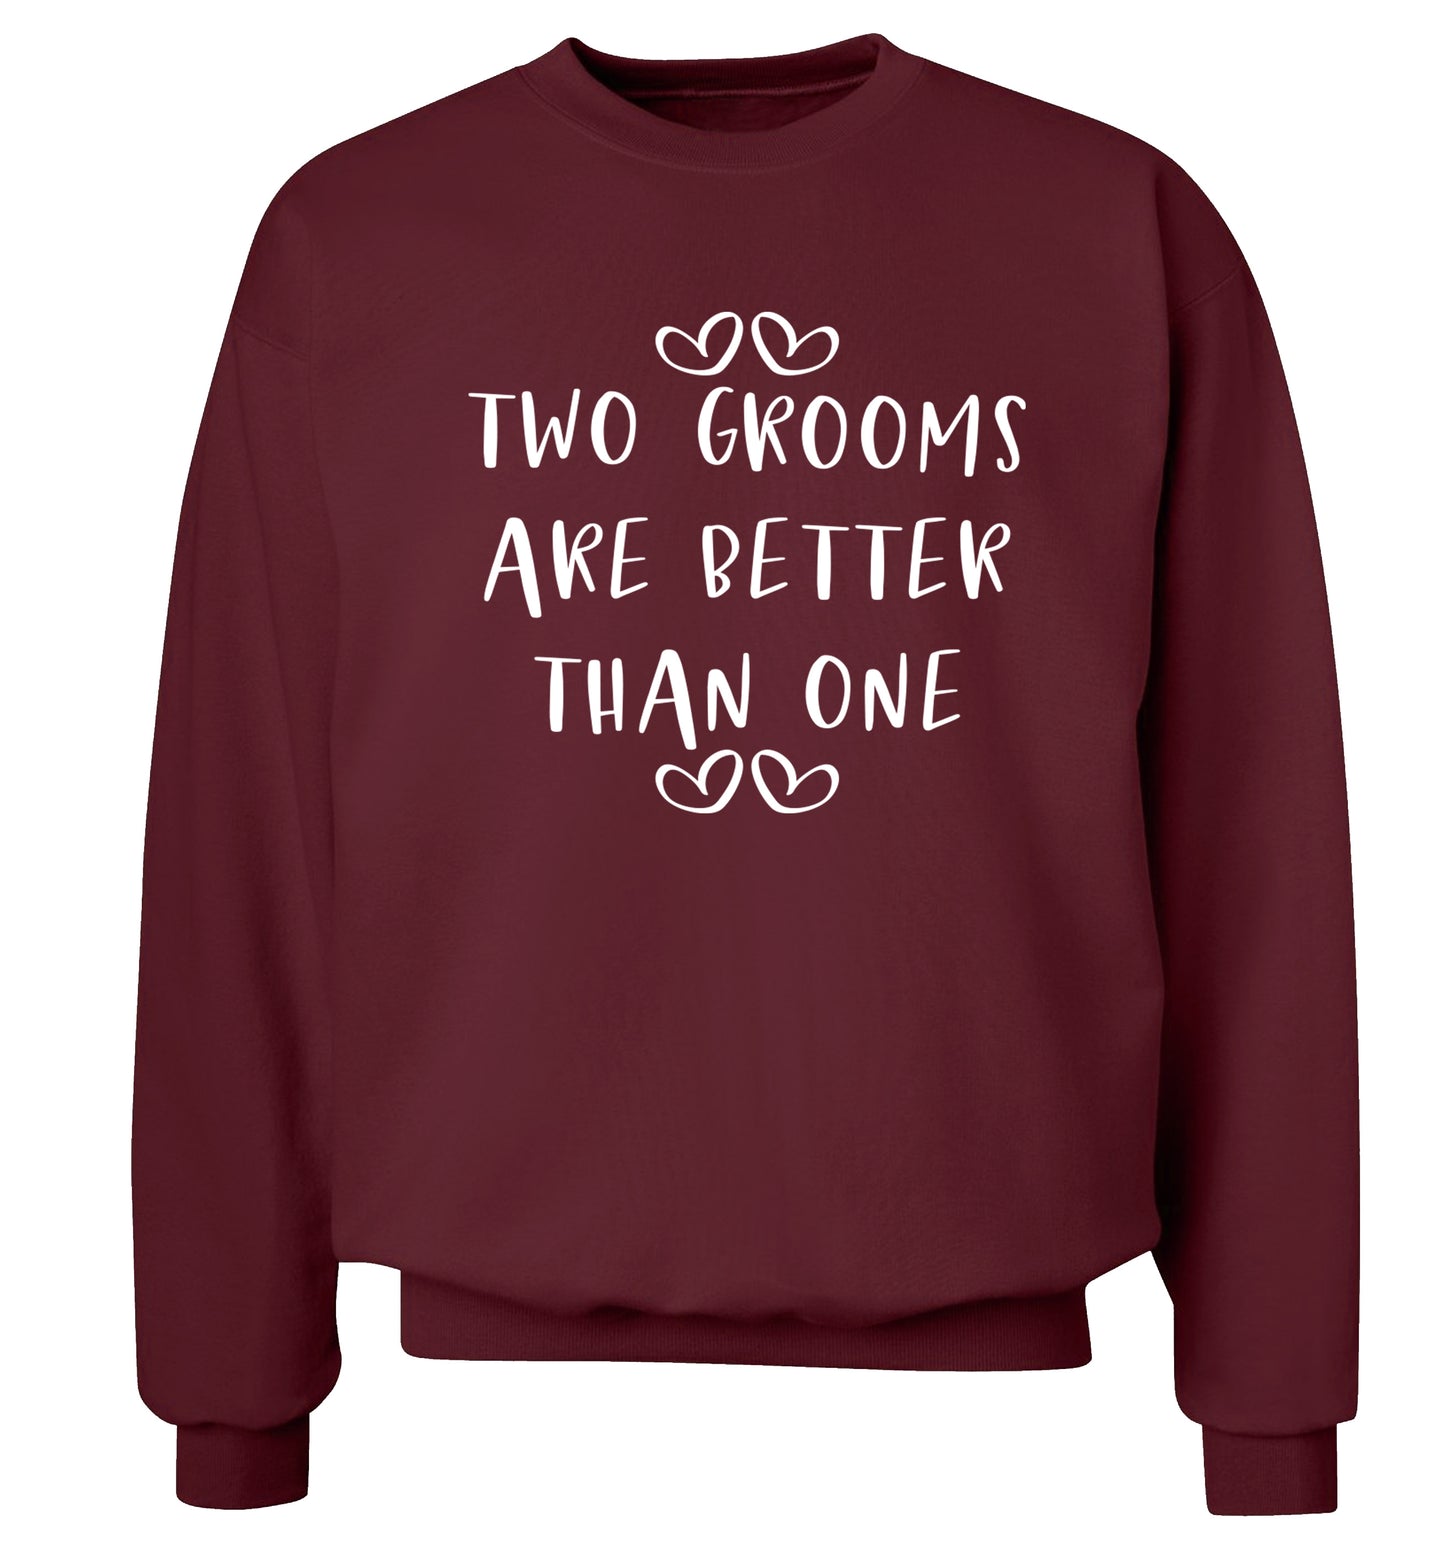 Two grooms are better than one adult's unisex maroon sweater 2XL